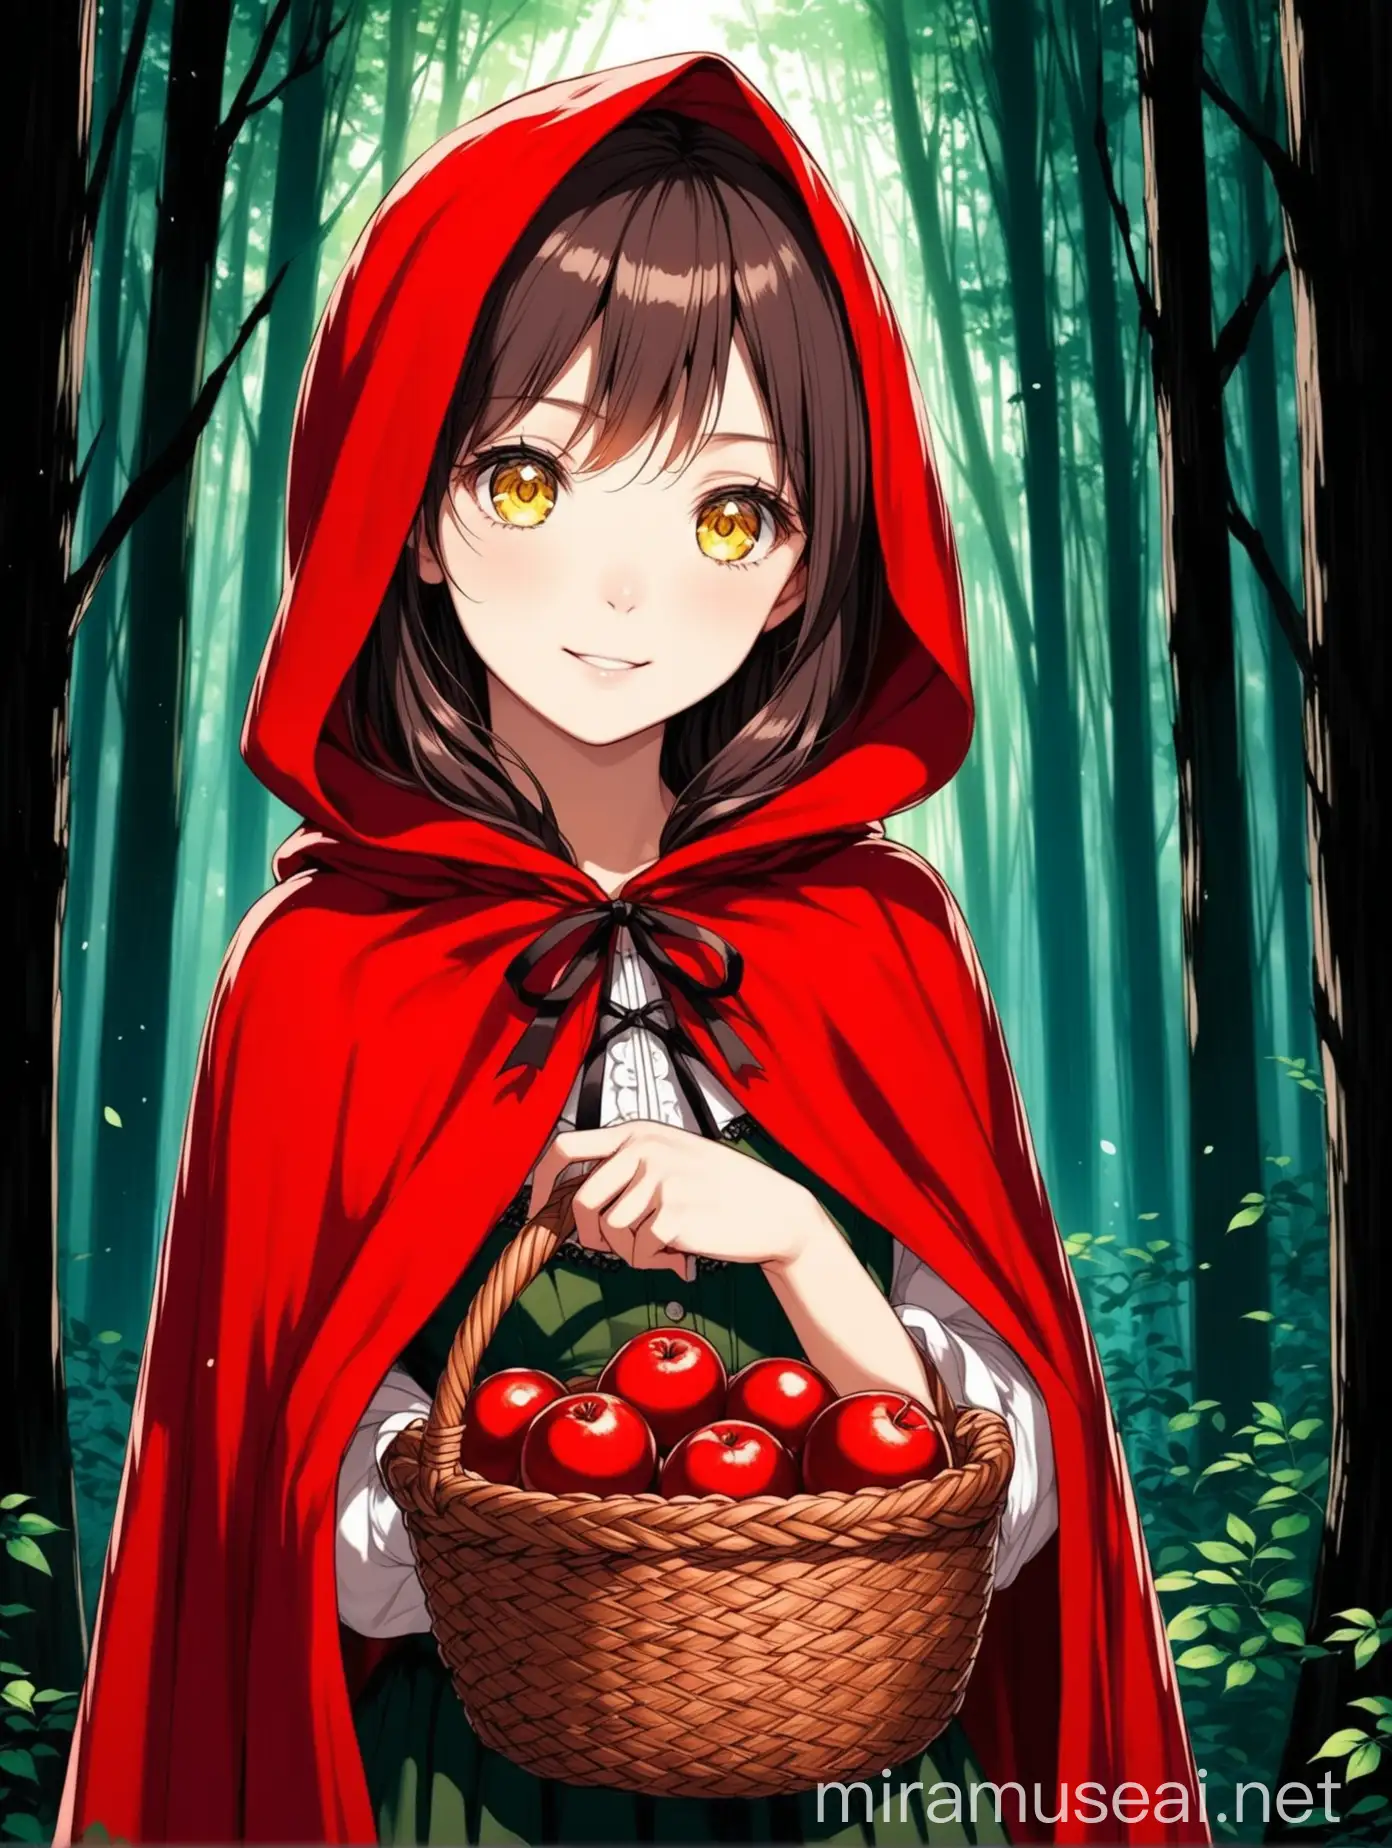 Anime Portrait of Red Riding Hood Teenager Girl in Dark Forest with Bright Yellow Eyes and Red Cape